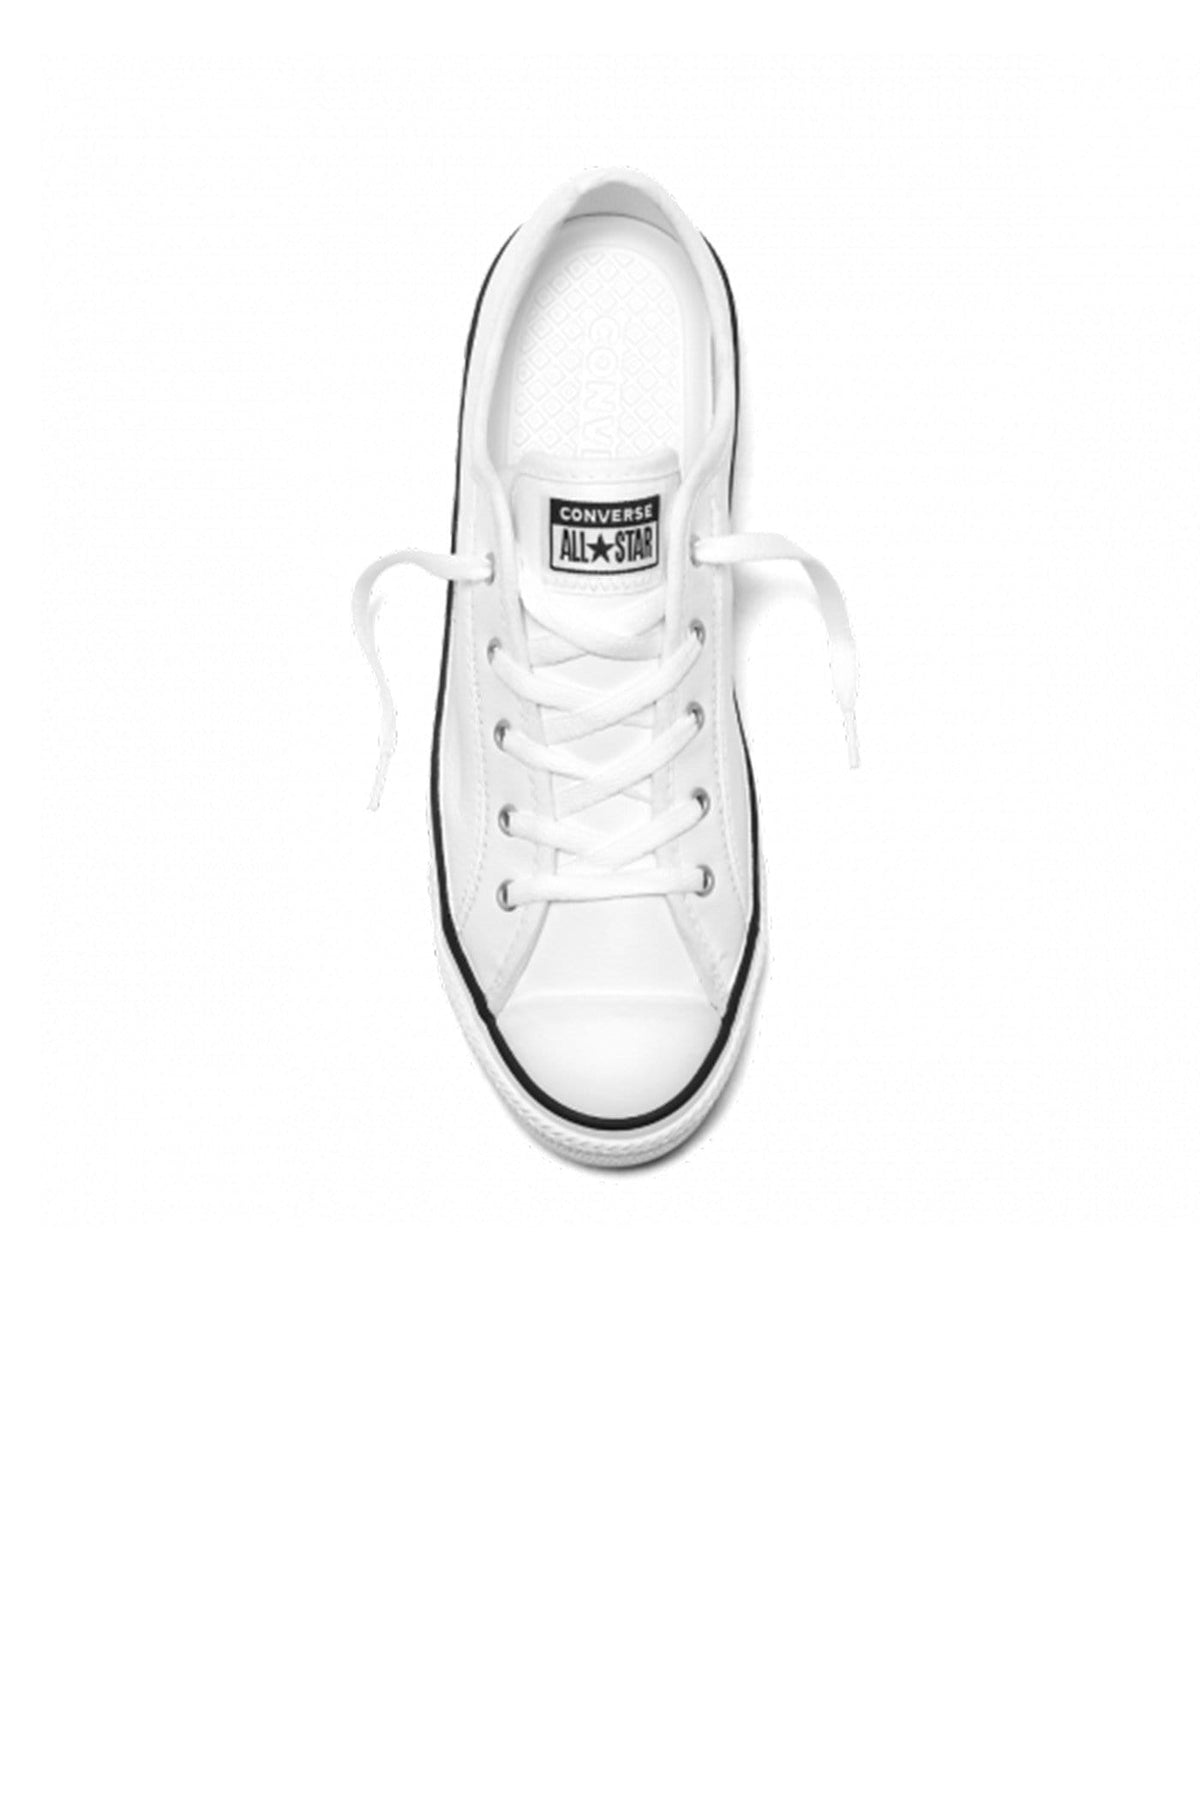 Ruilhandel sectie tsunami Chuck Taylor All Star Dainty Leather Low Top White - Jean Jail